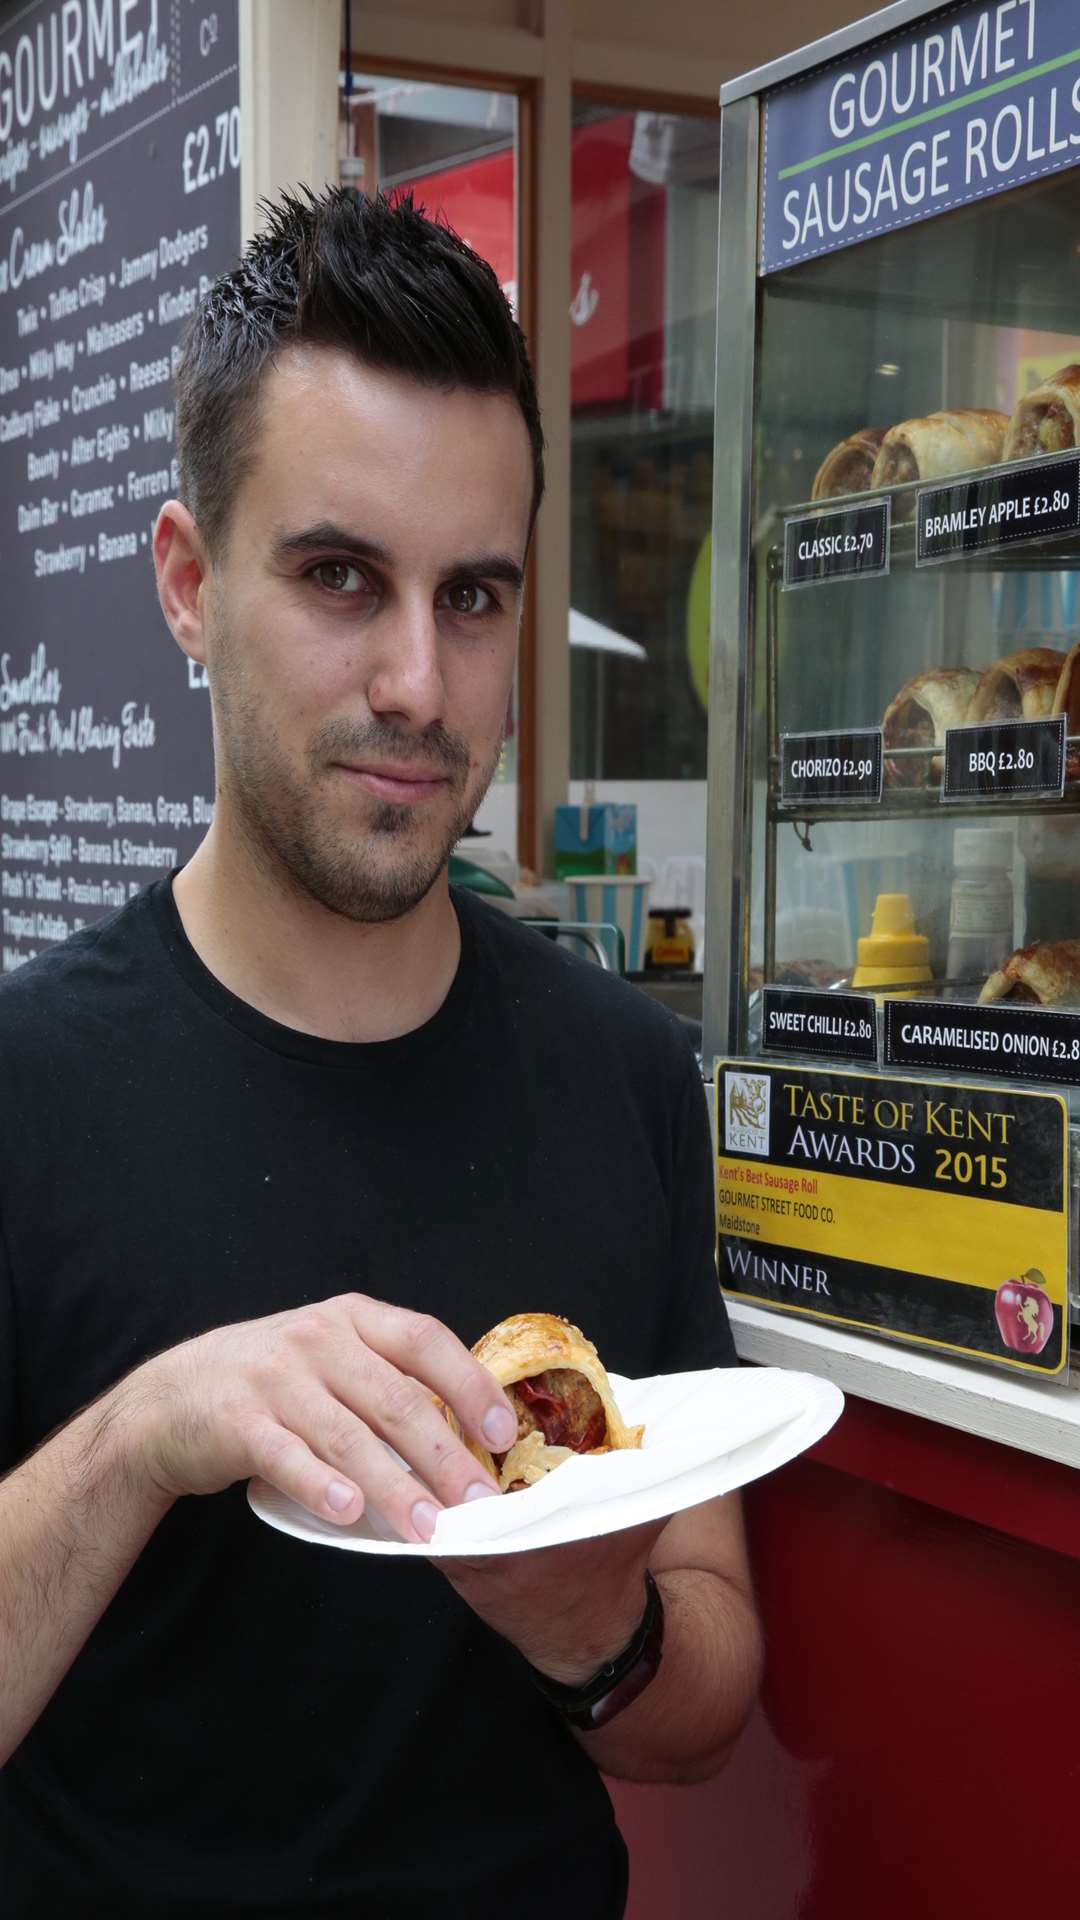 Sausage roll stall owner Ash Green